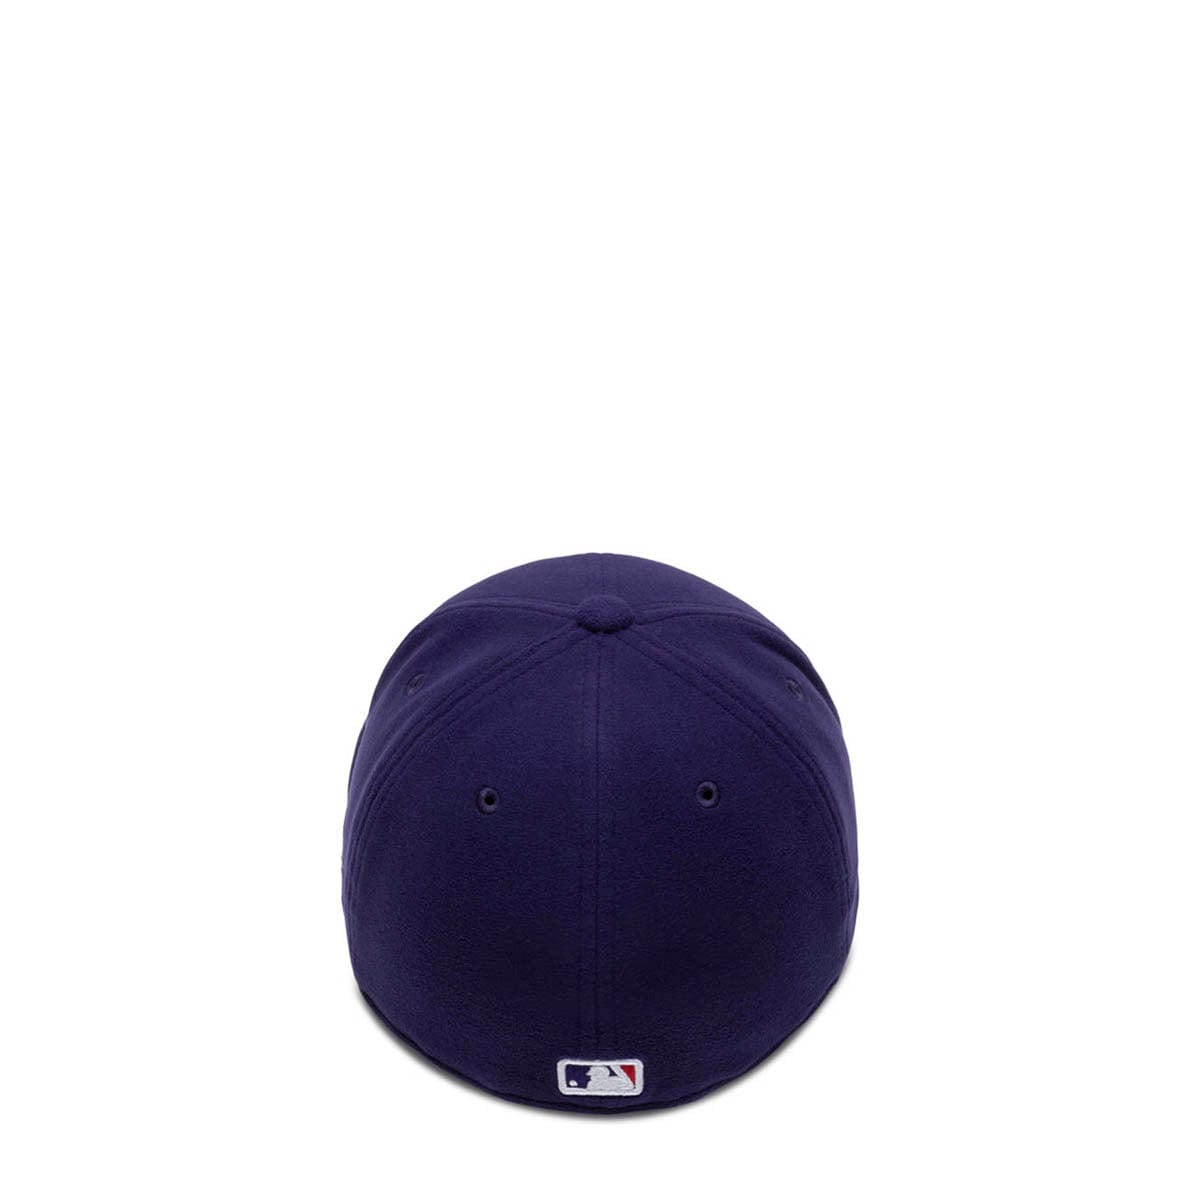 Bodega Store Accessories - HATS - Snapback-Fitted Hat DODGERS POLARTEC 5950 10160 LOS ANGELES DODGERS NAVY